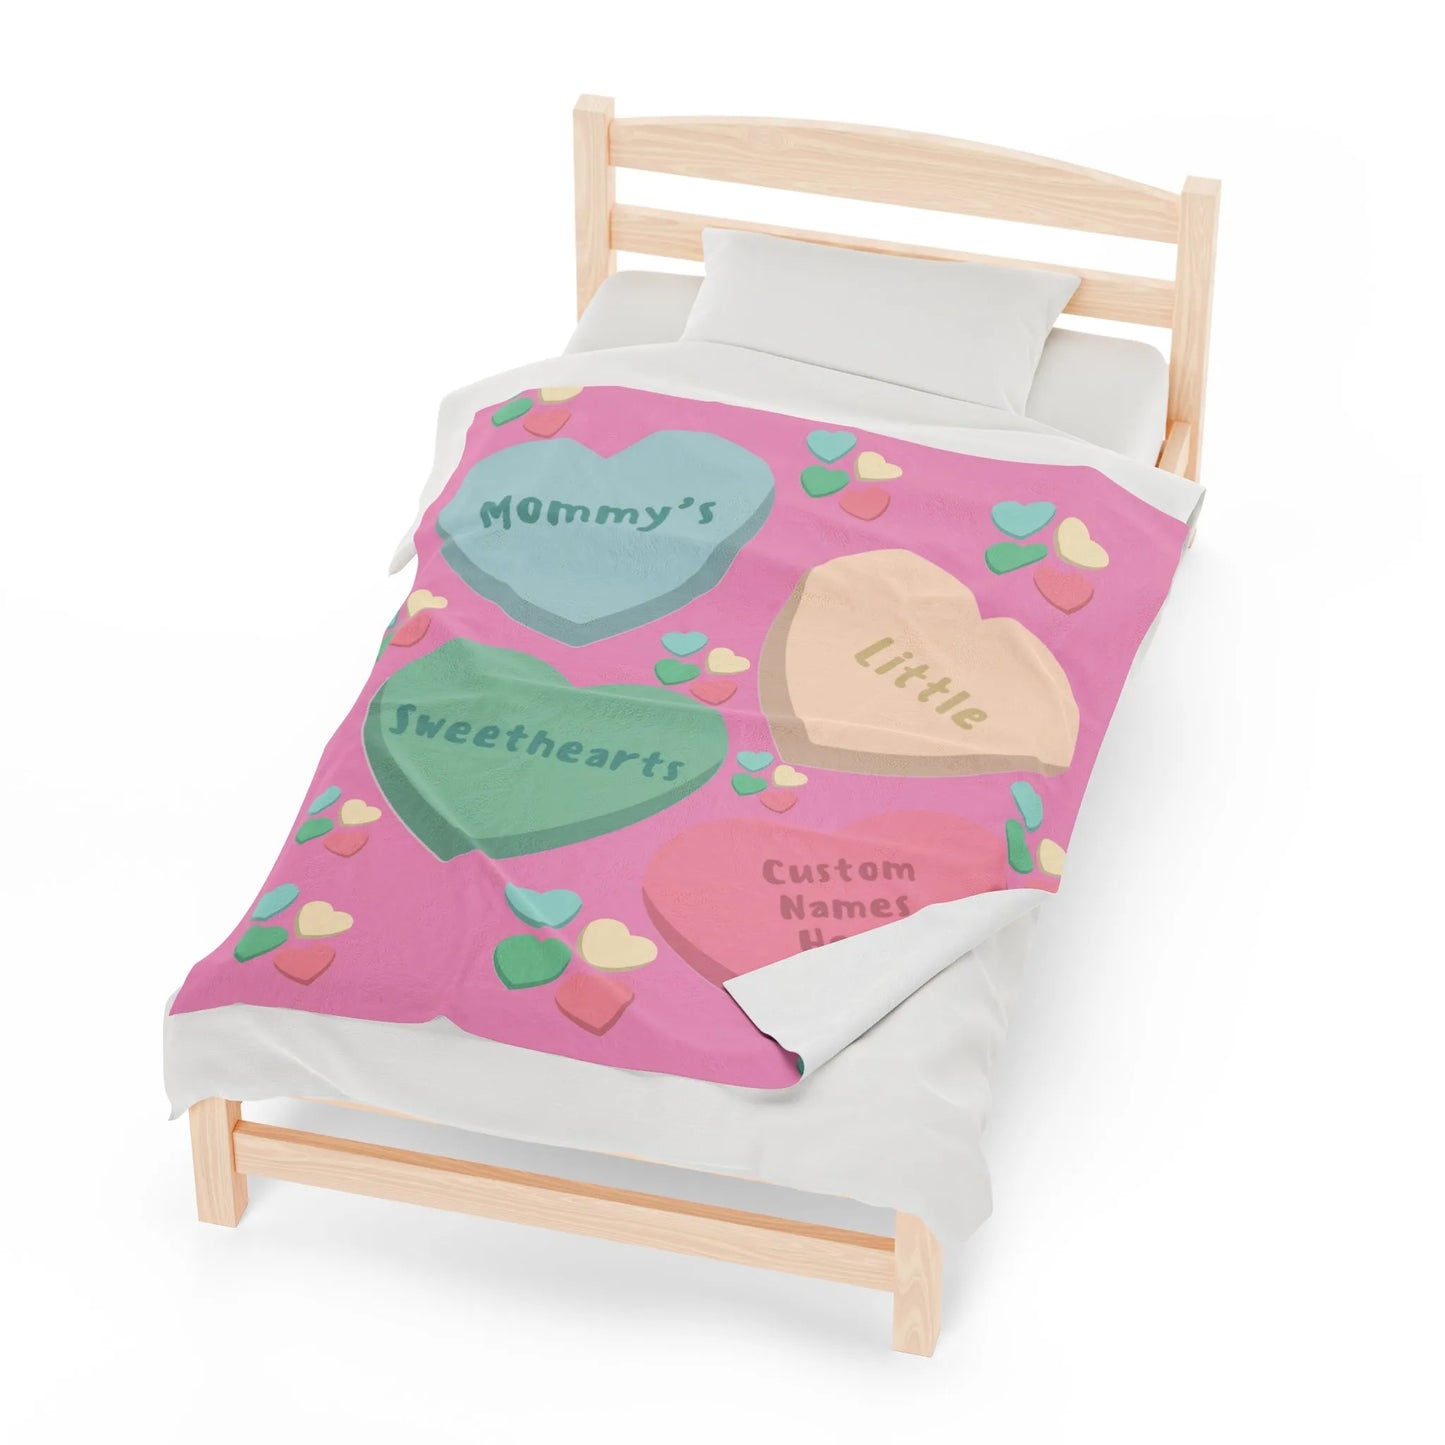 Mommy's Little Sweethearts Valentine's Day Blanket - Personalized Mommy's Little Sweethearts Blanket medium